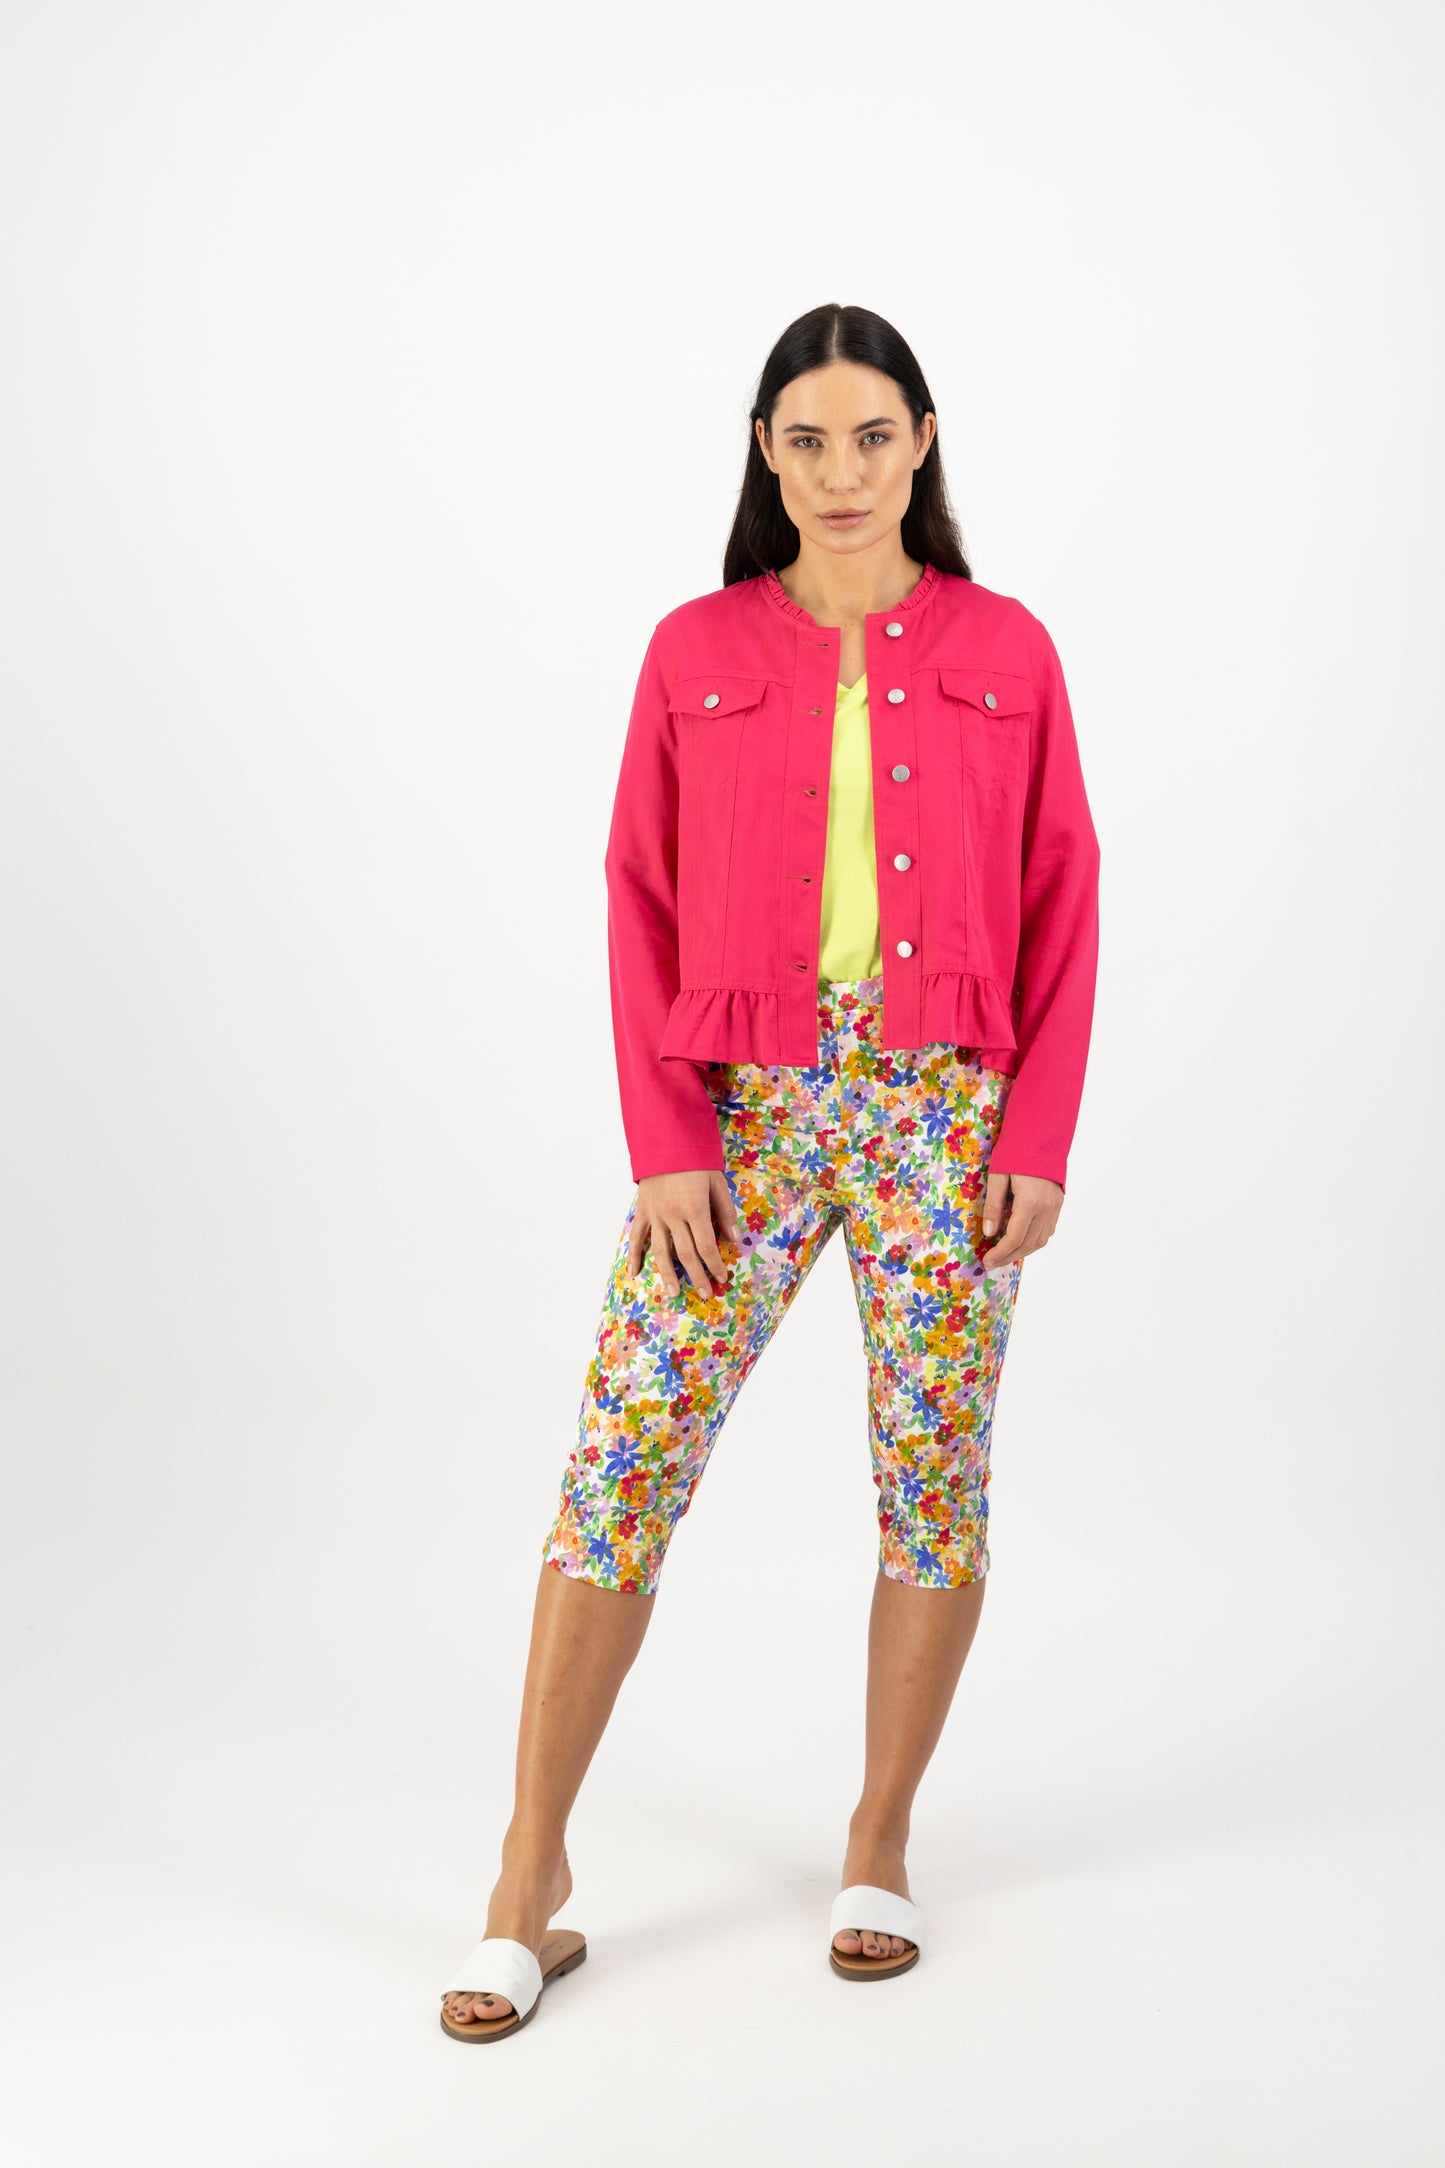 Vassalli - 2047N - Tencel Jacket with Frill Hem - 2 Colours - 50% Off - Cerise and Green only left